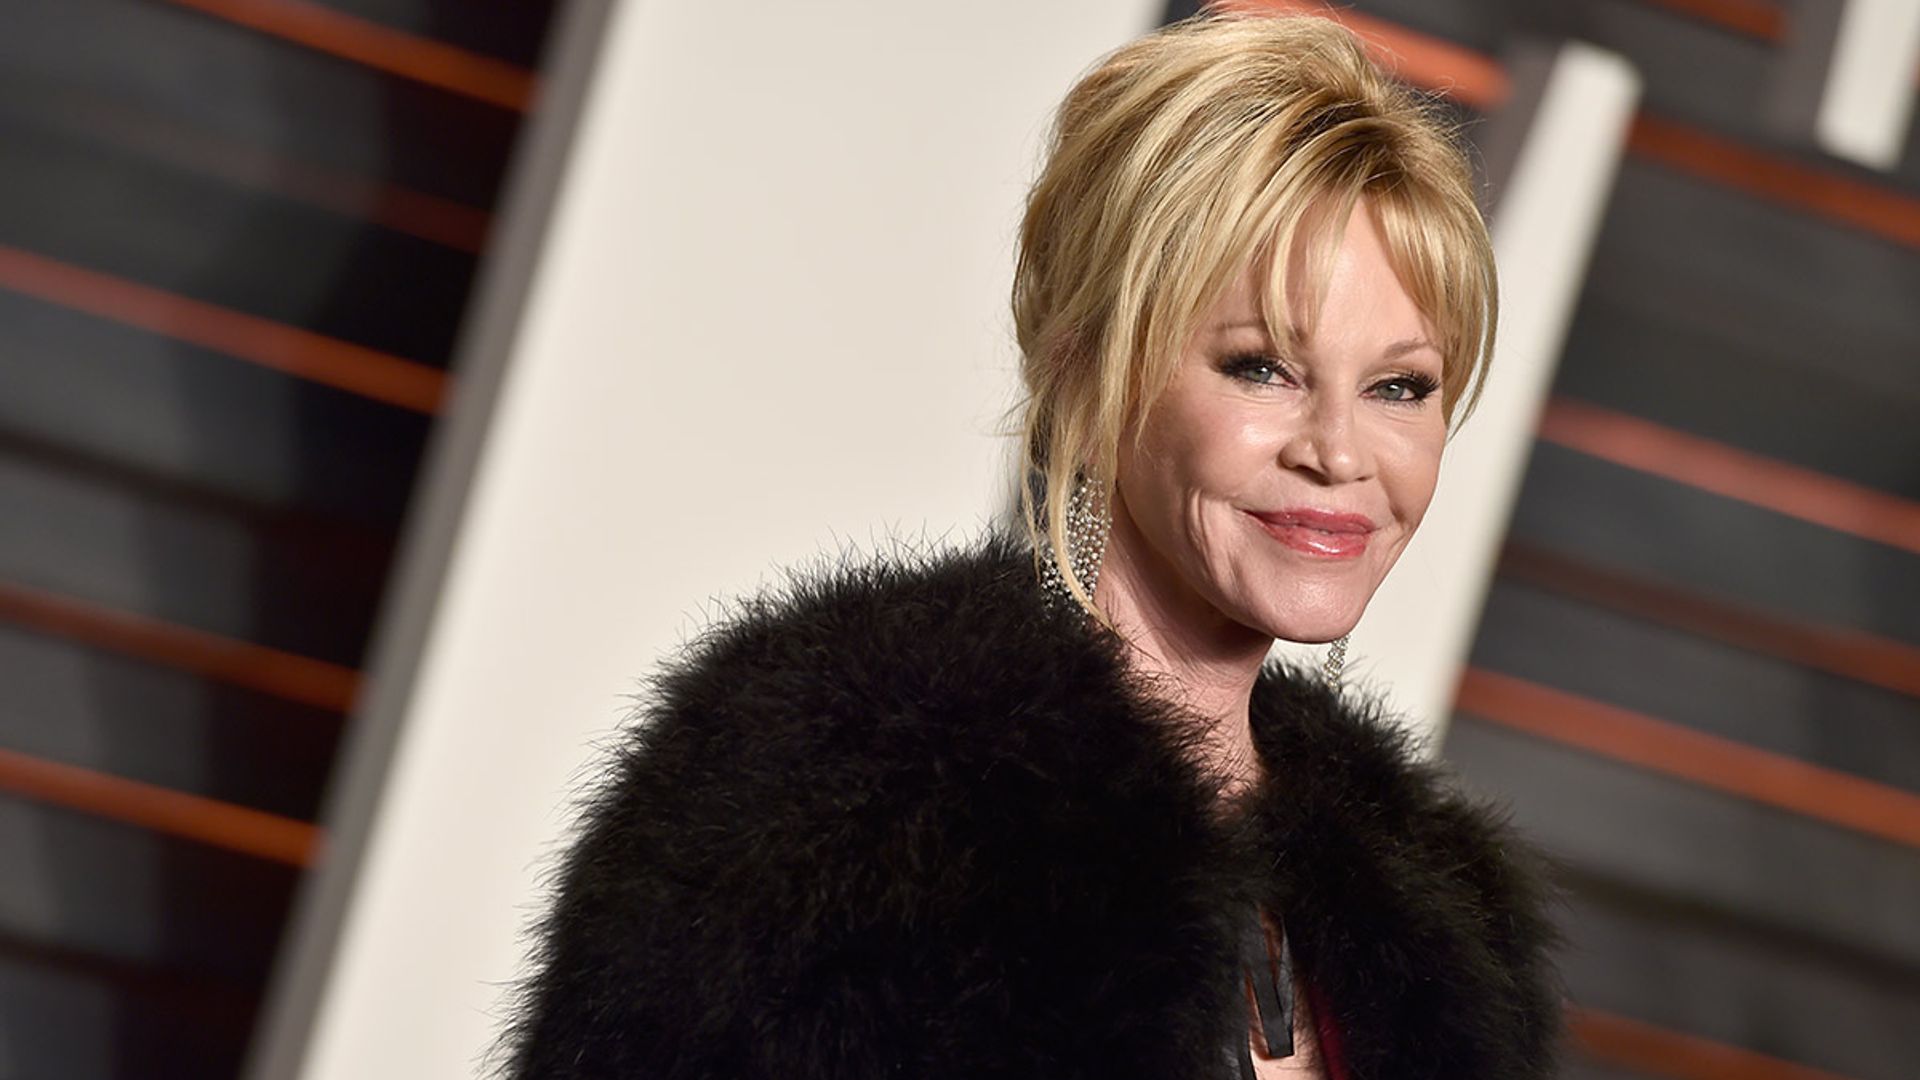 Melanie Griffith, 63, stuns fans by stripping to underwear for candid photos